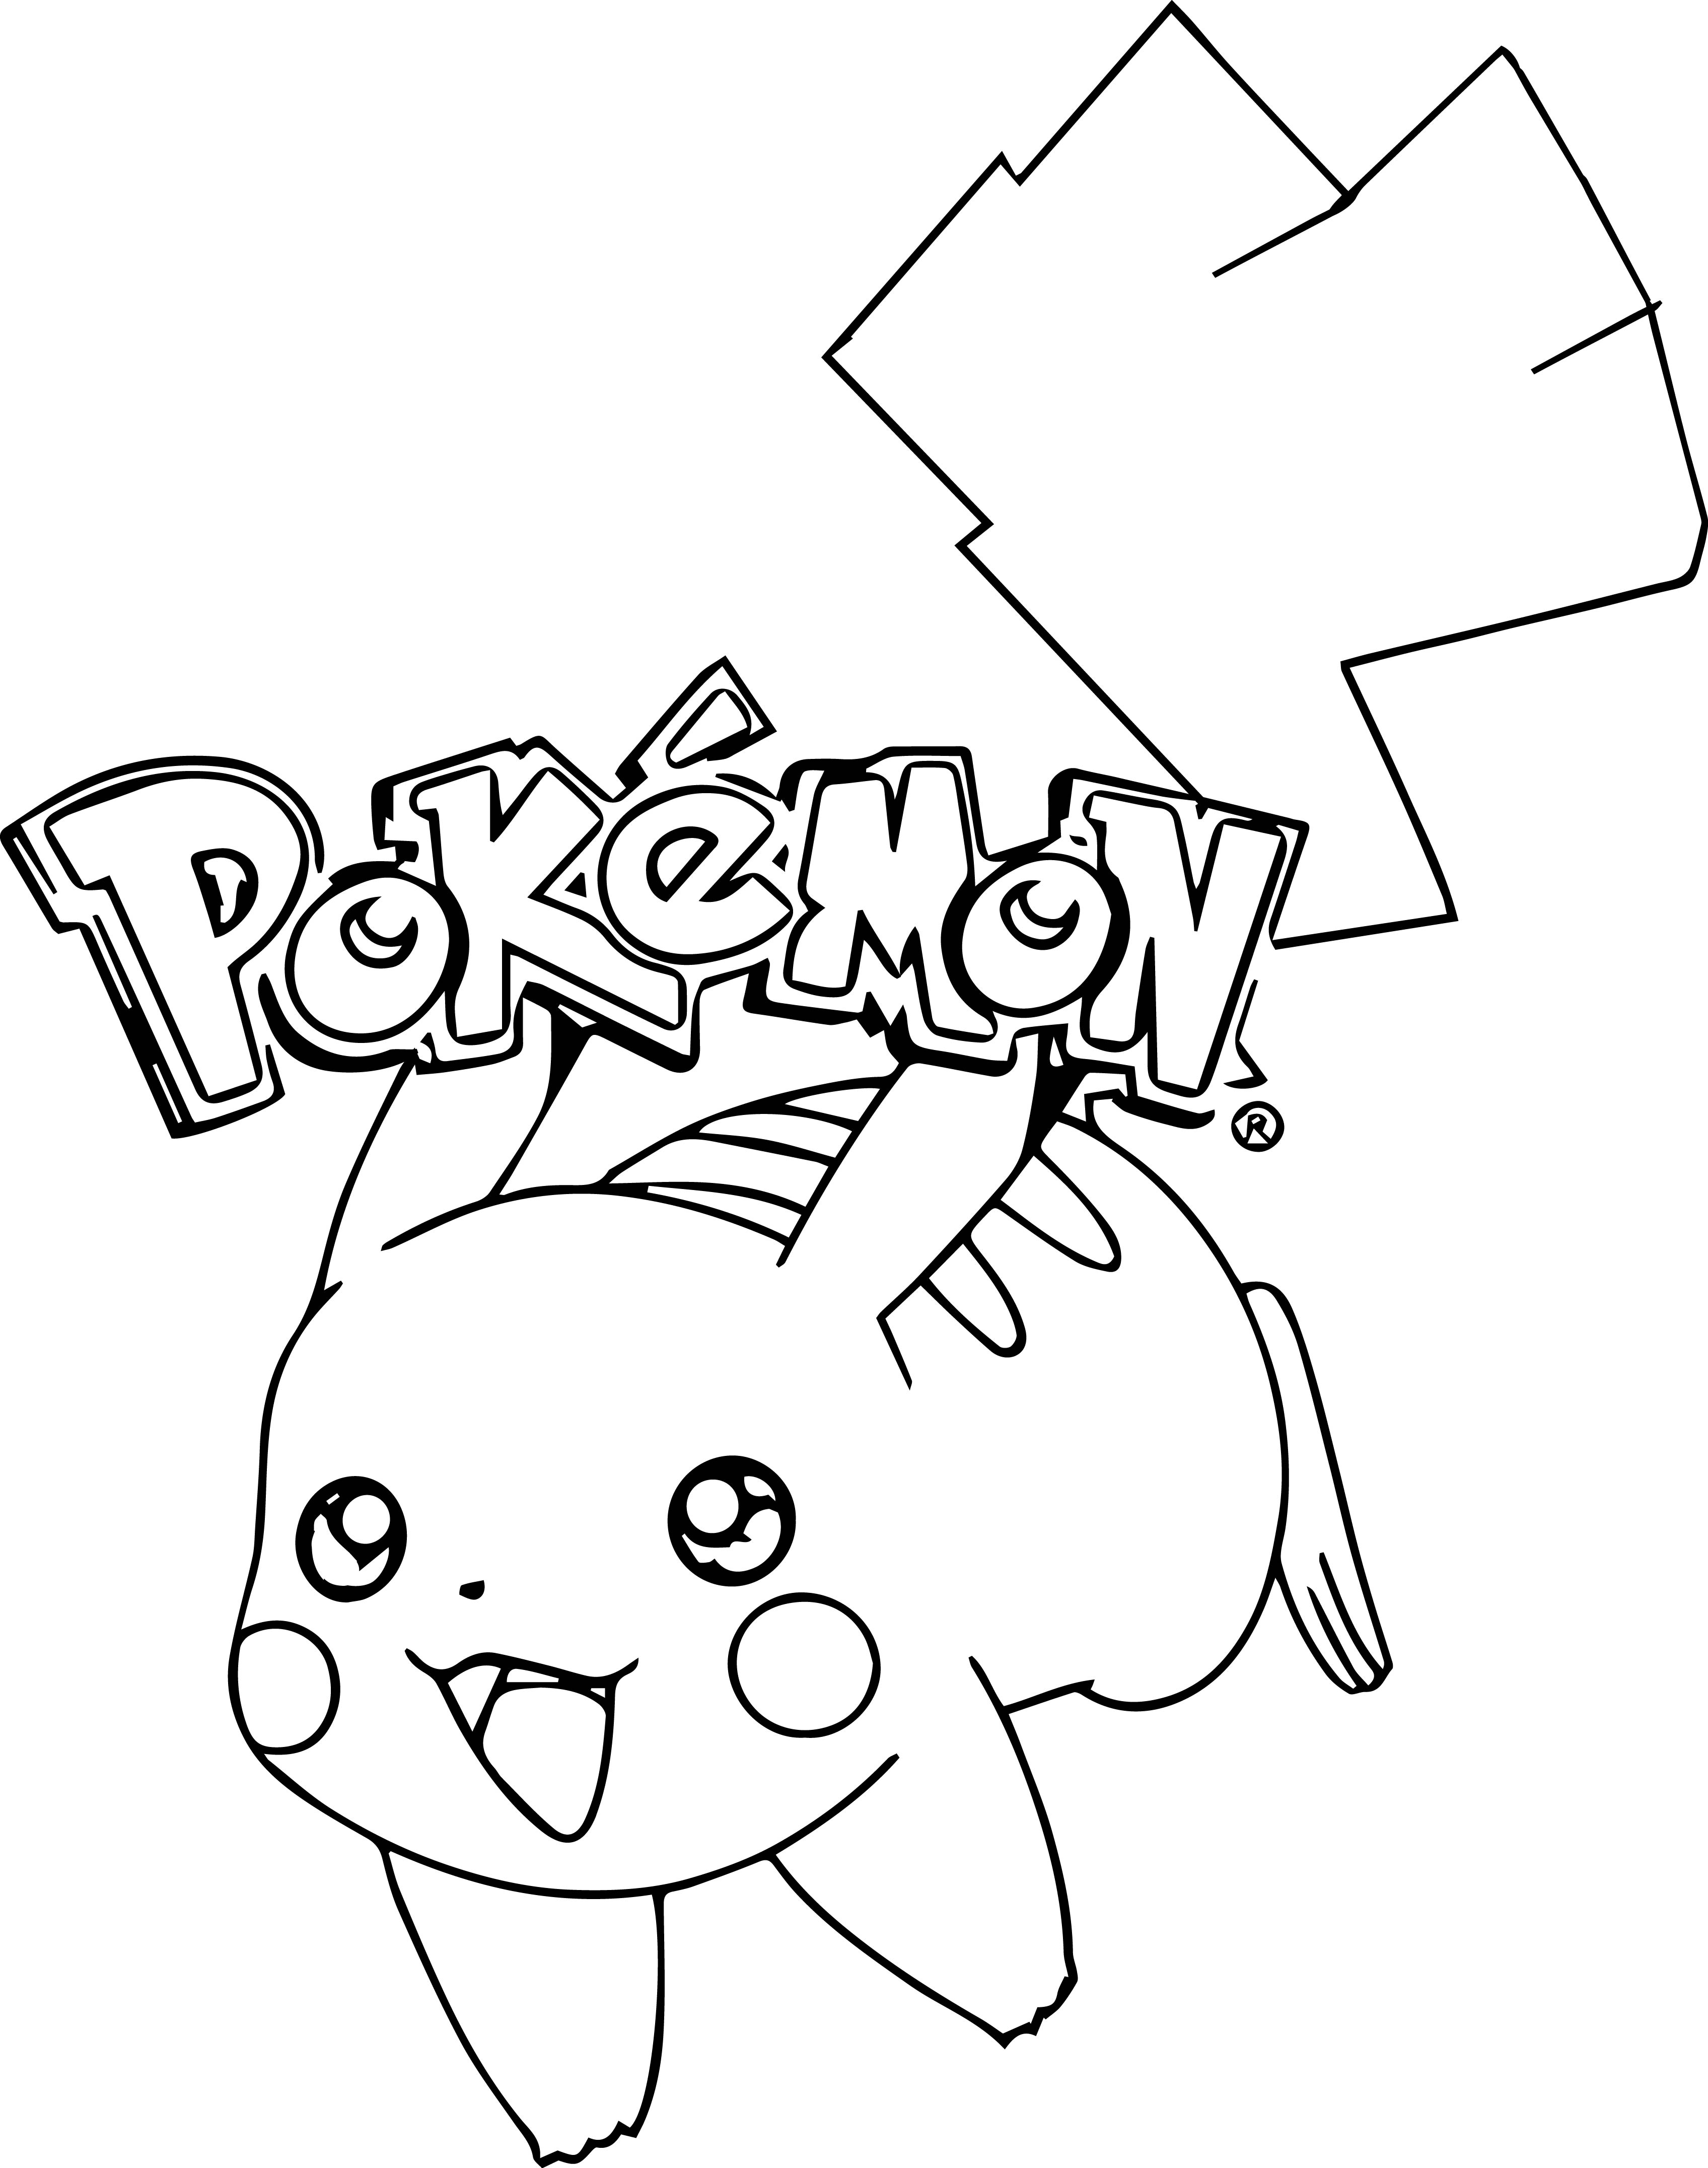 pikachu-drawing-pictures-at-getdrawings-free-download